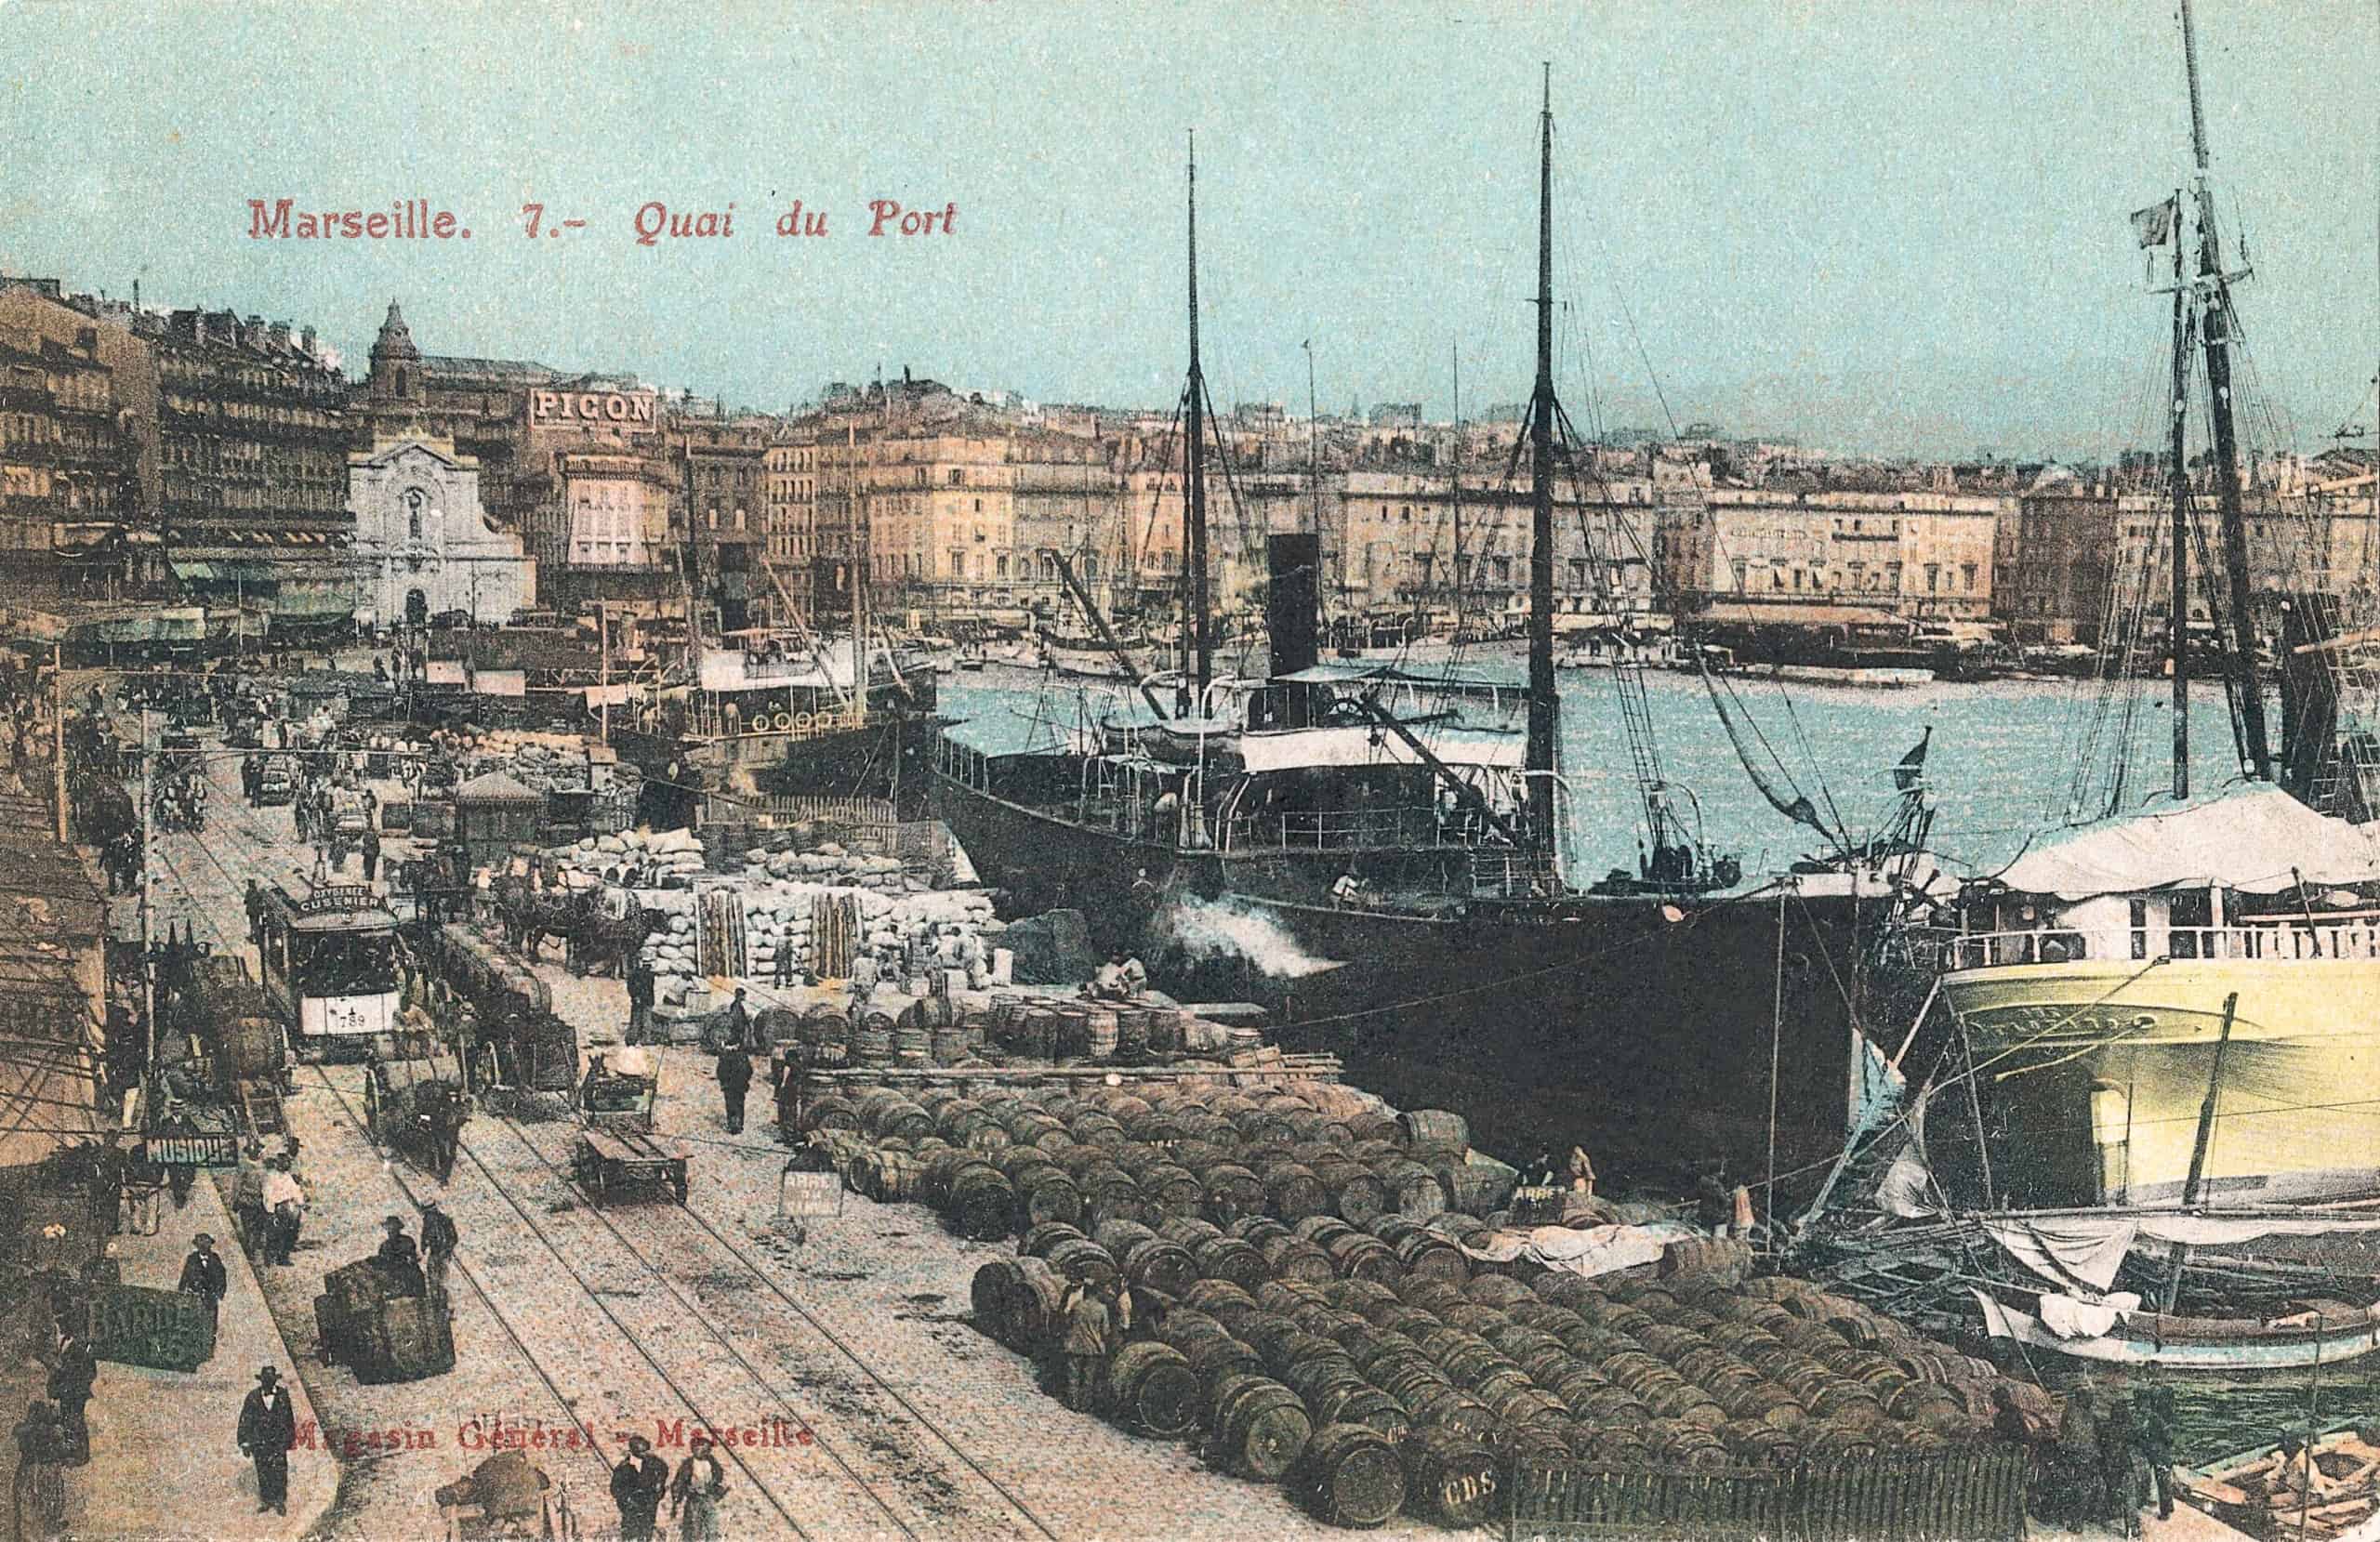 PORTS IN THE EARLY 20th CENTURY